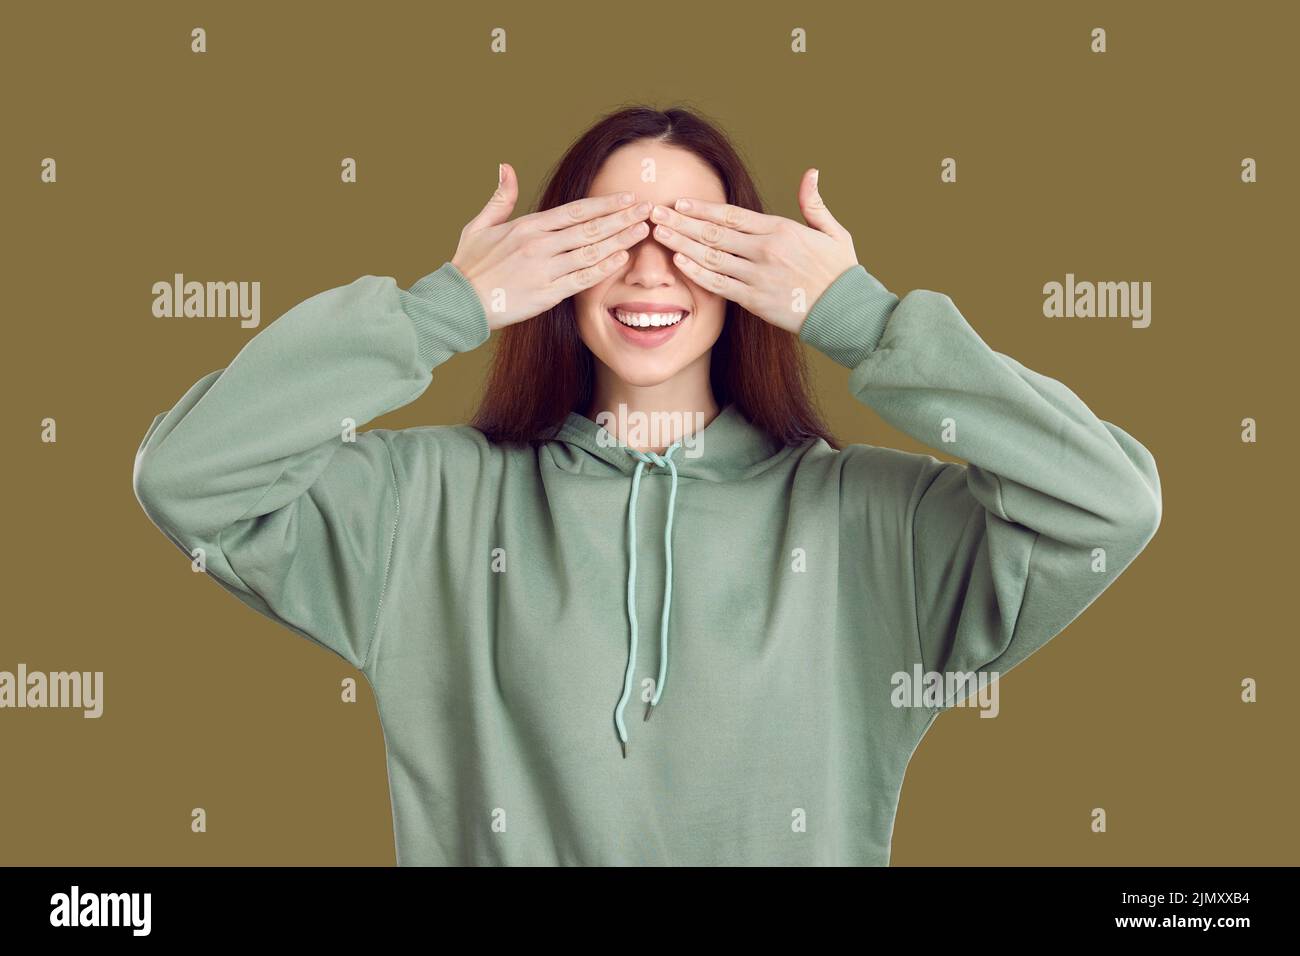 Funny smiling woman in anticipation of something interesting closes her eyes with her hands. Stock Photo